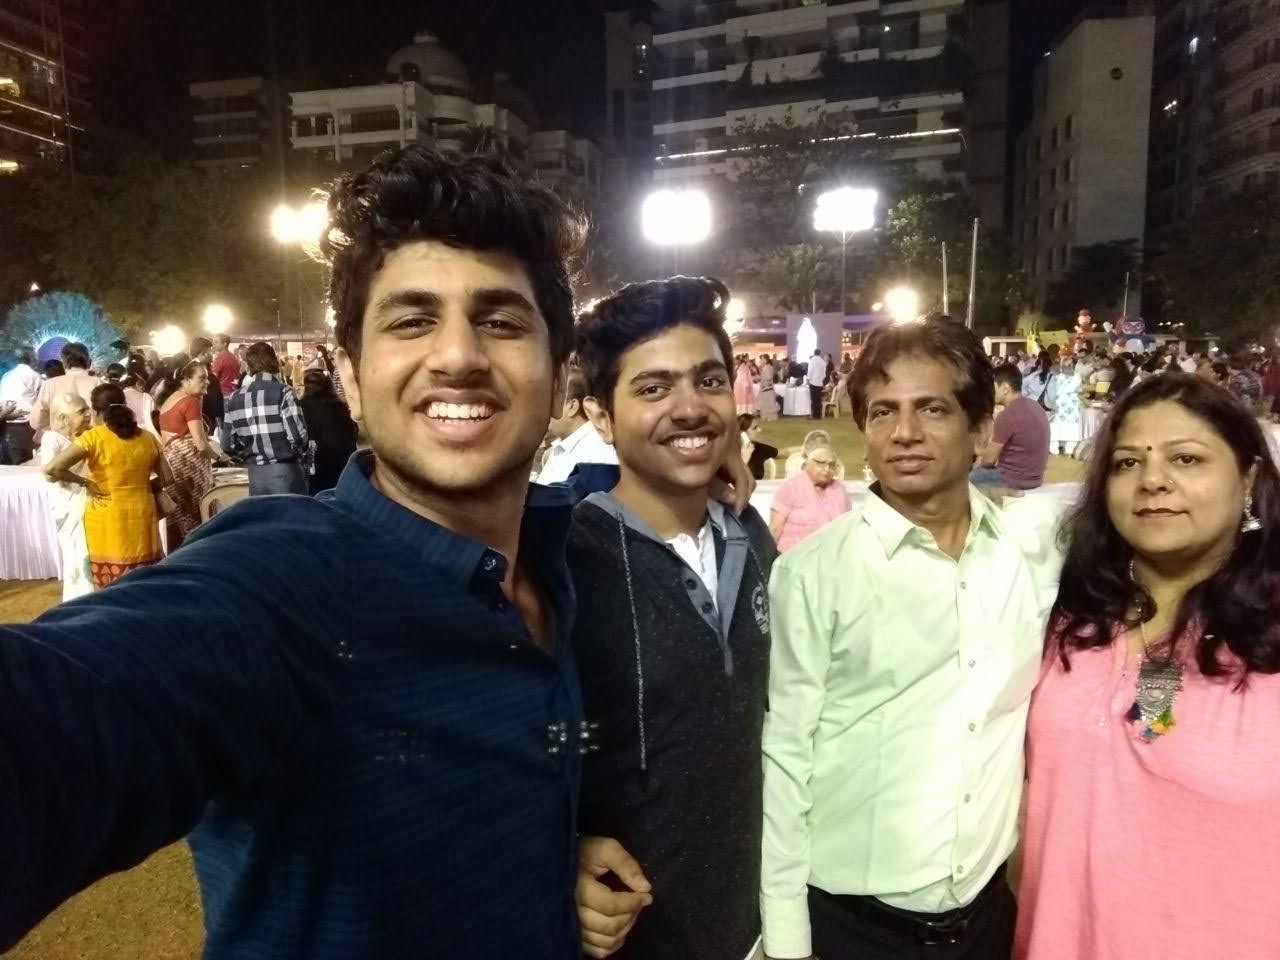 A picture from one of the fairs on an open crowd. Left to right: Aakash (brother), Tushar, Father, Mother.